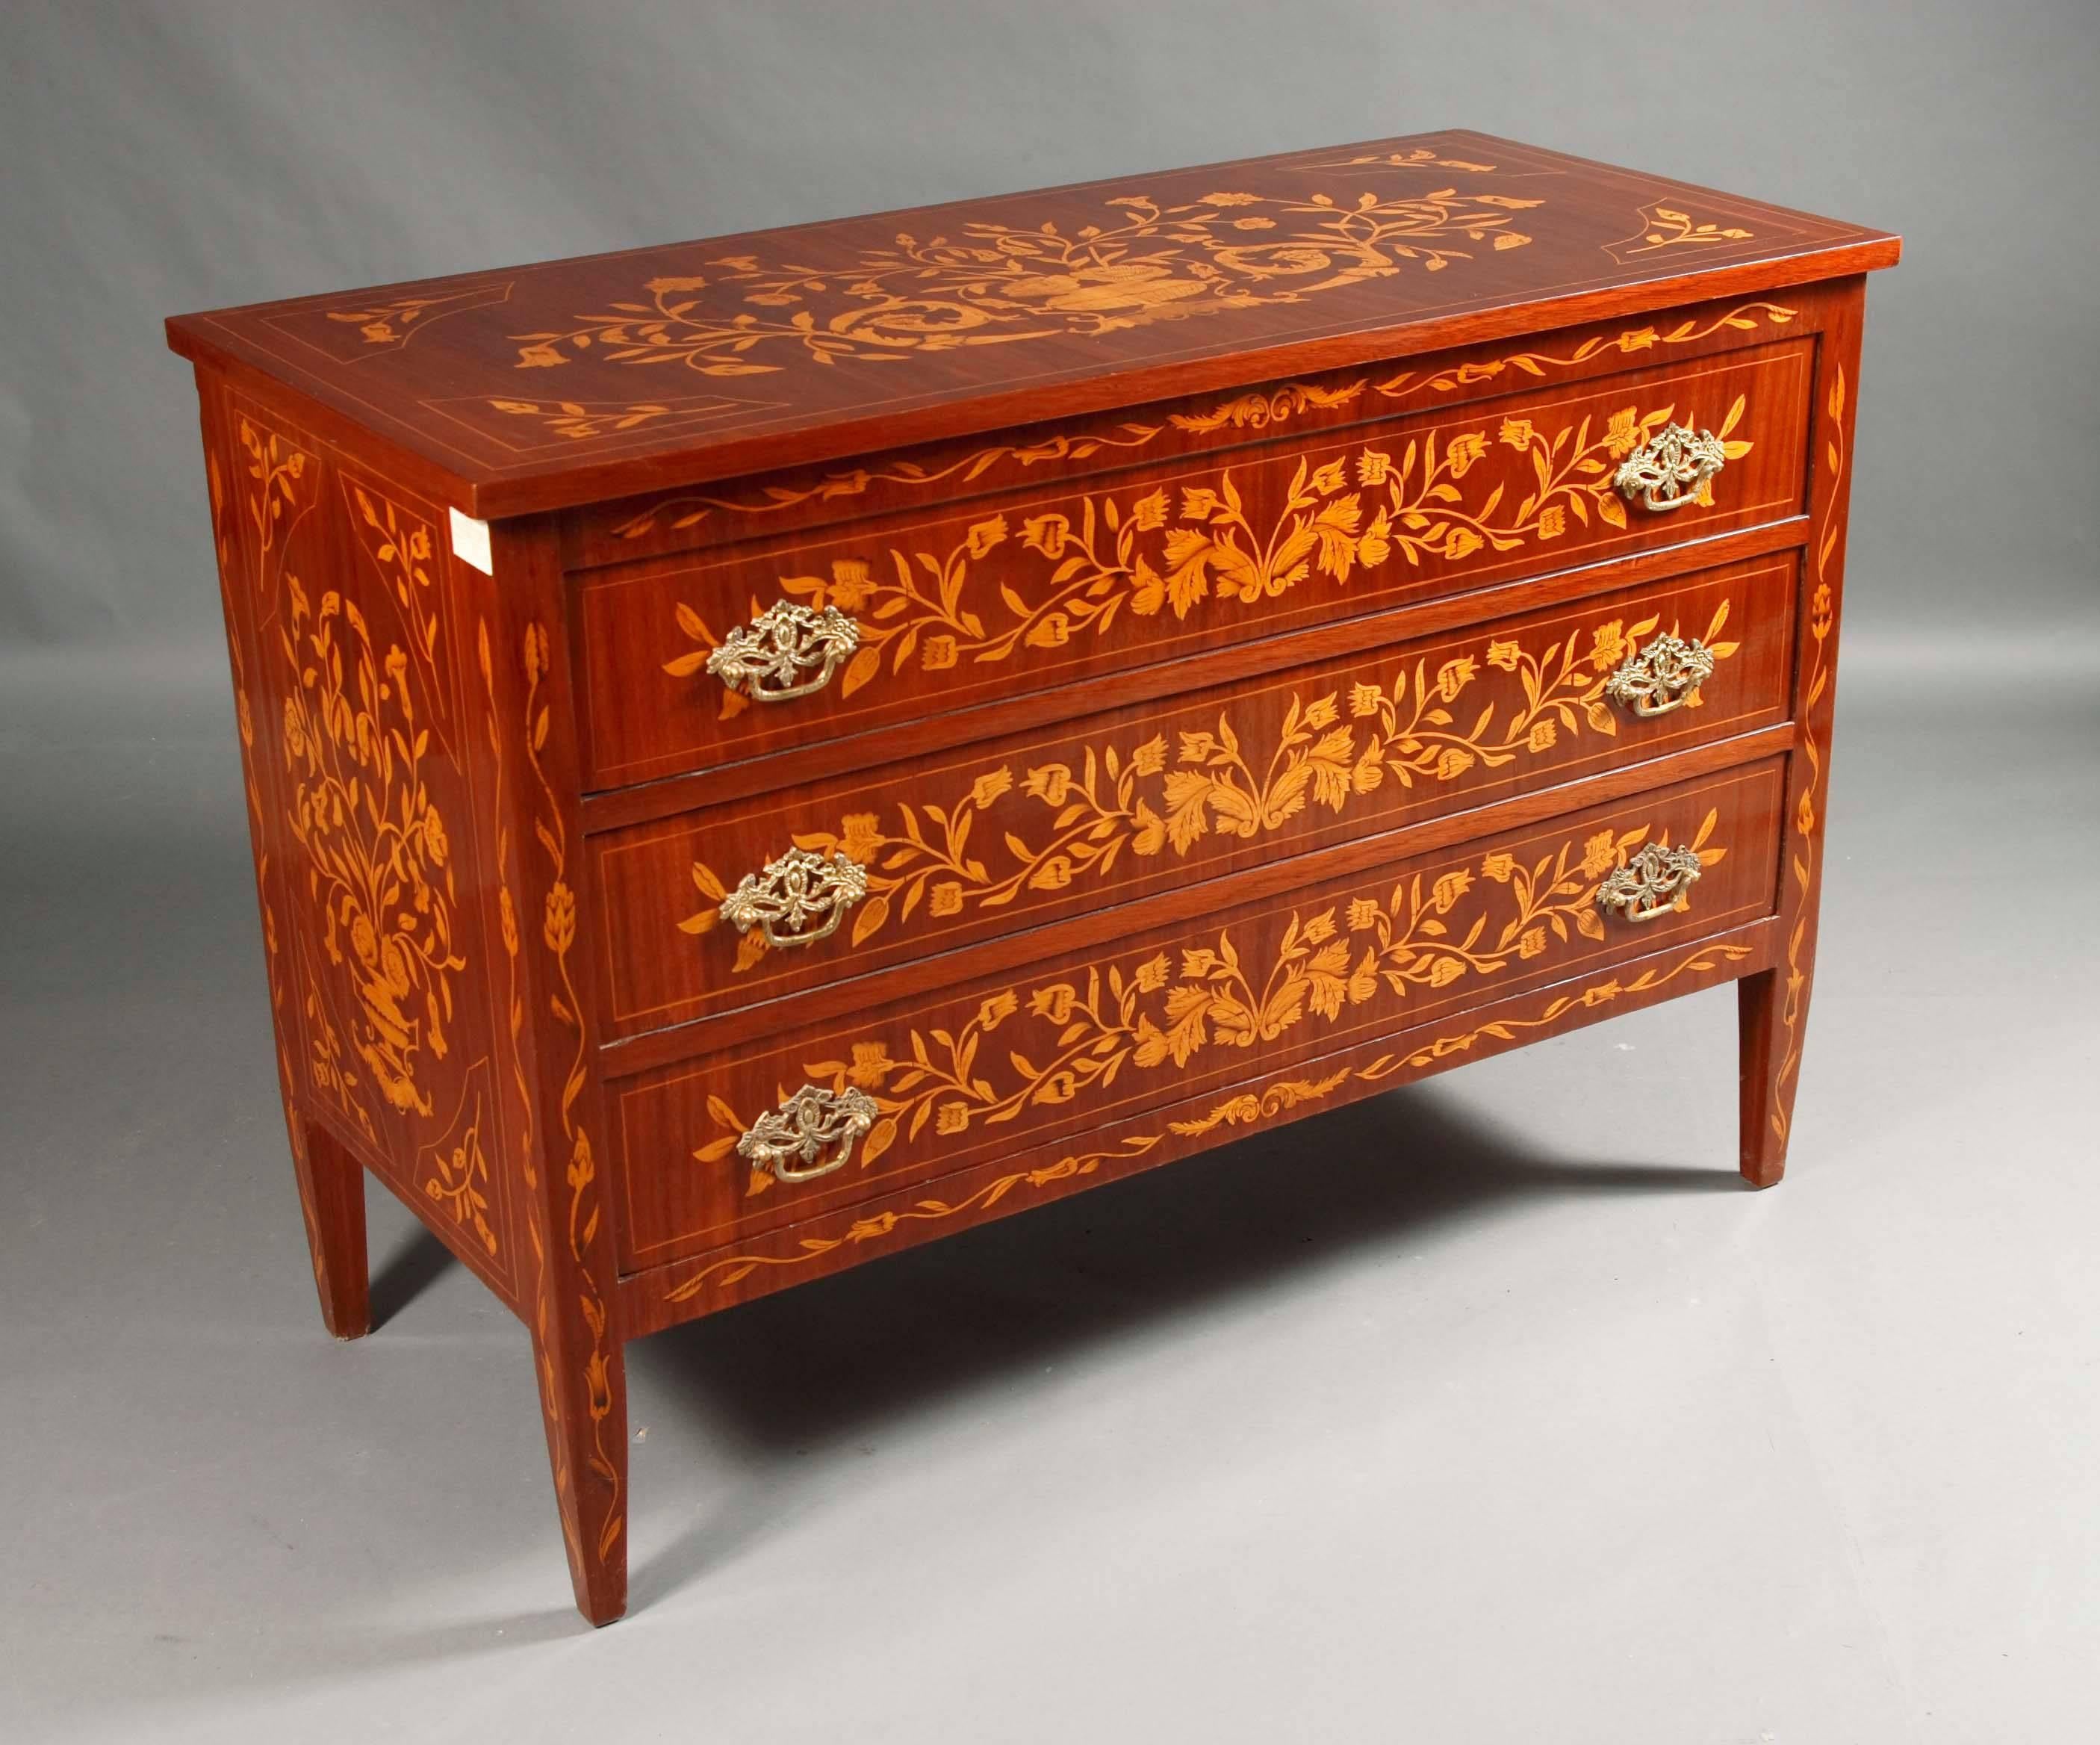 German Marquetry Inlaid Commode in Neoclassical Style, Mahagony and Maple Veneer